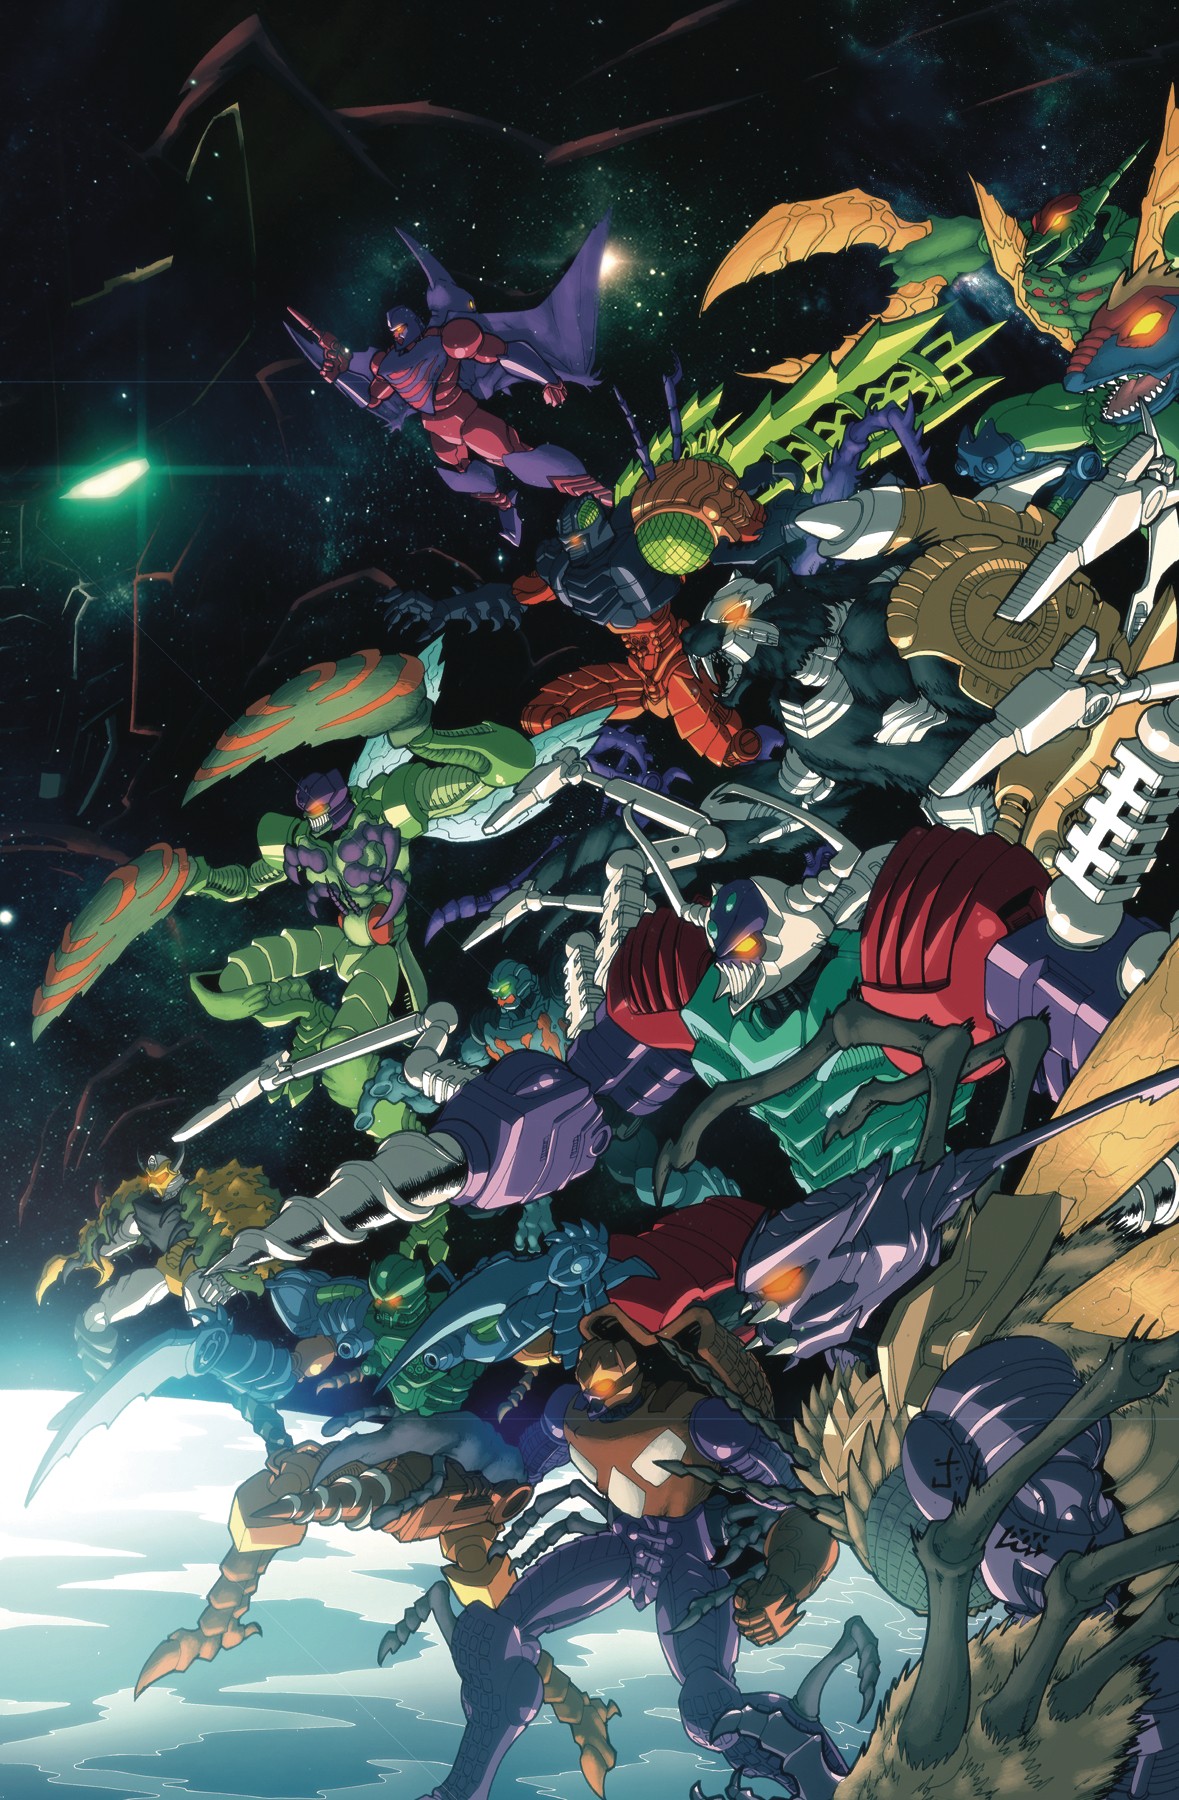 IDW January 2020 Transformers Comics Solicitations Features the Beast Wars  and G1 Predacons